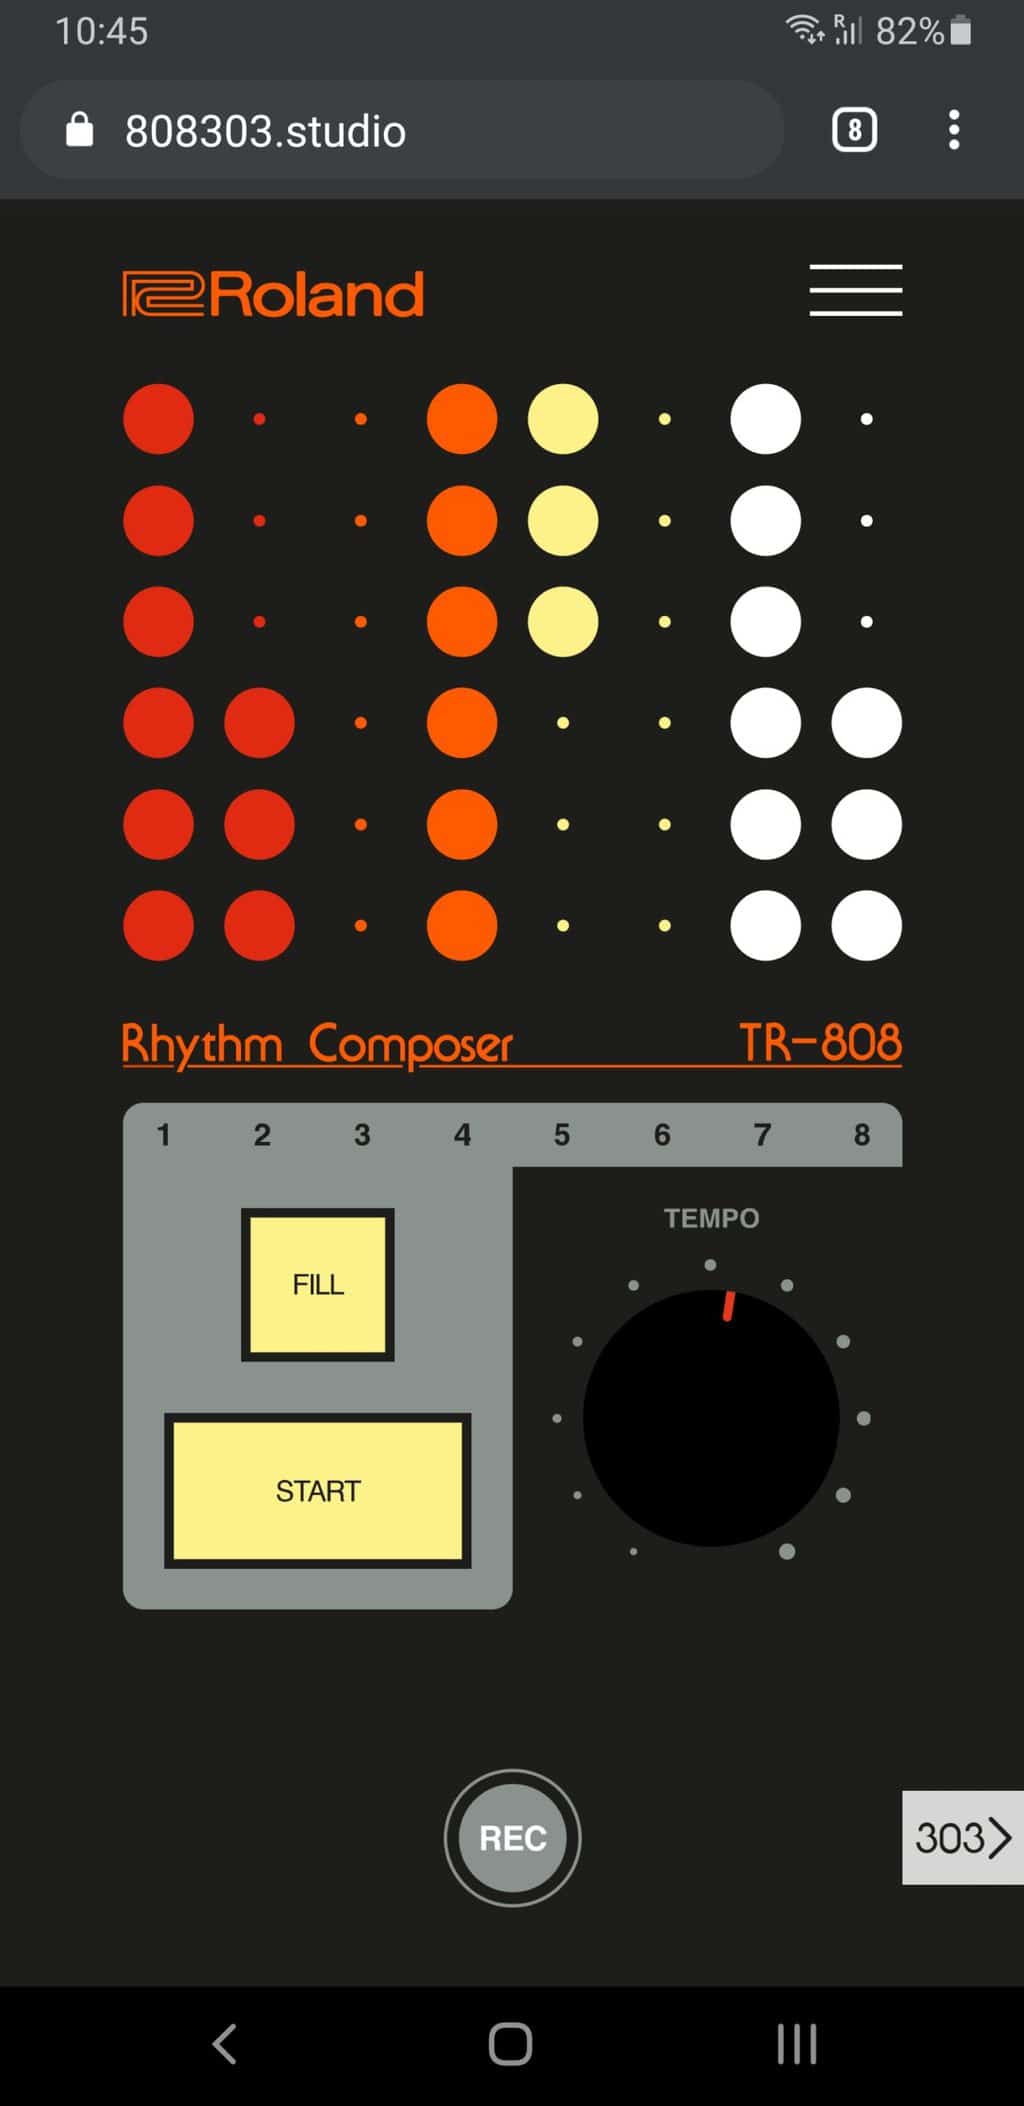 Here's how 808303.studio looks in a mobile browser.